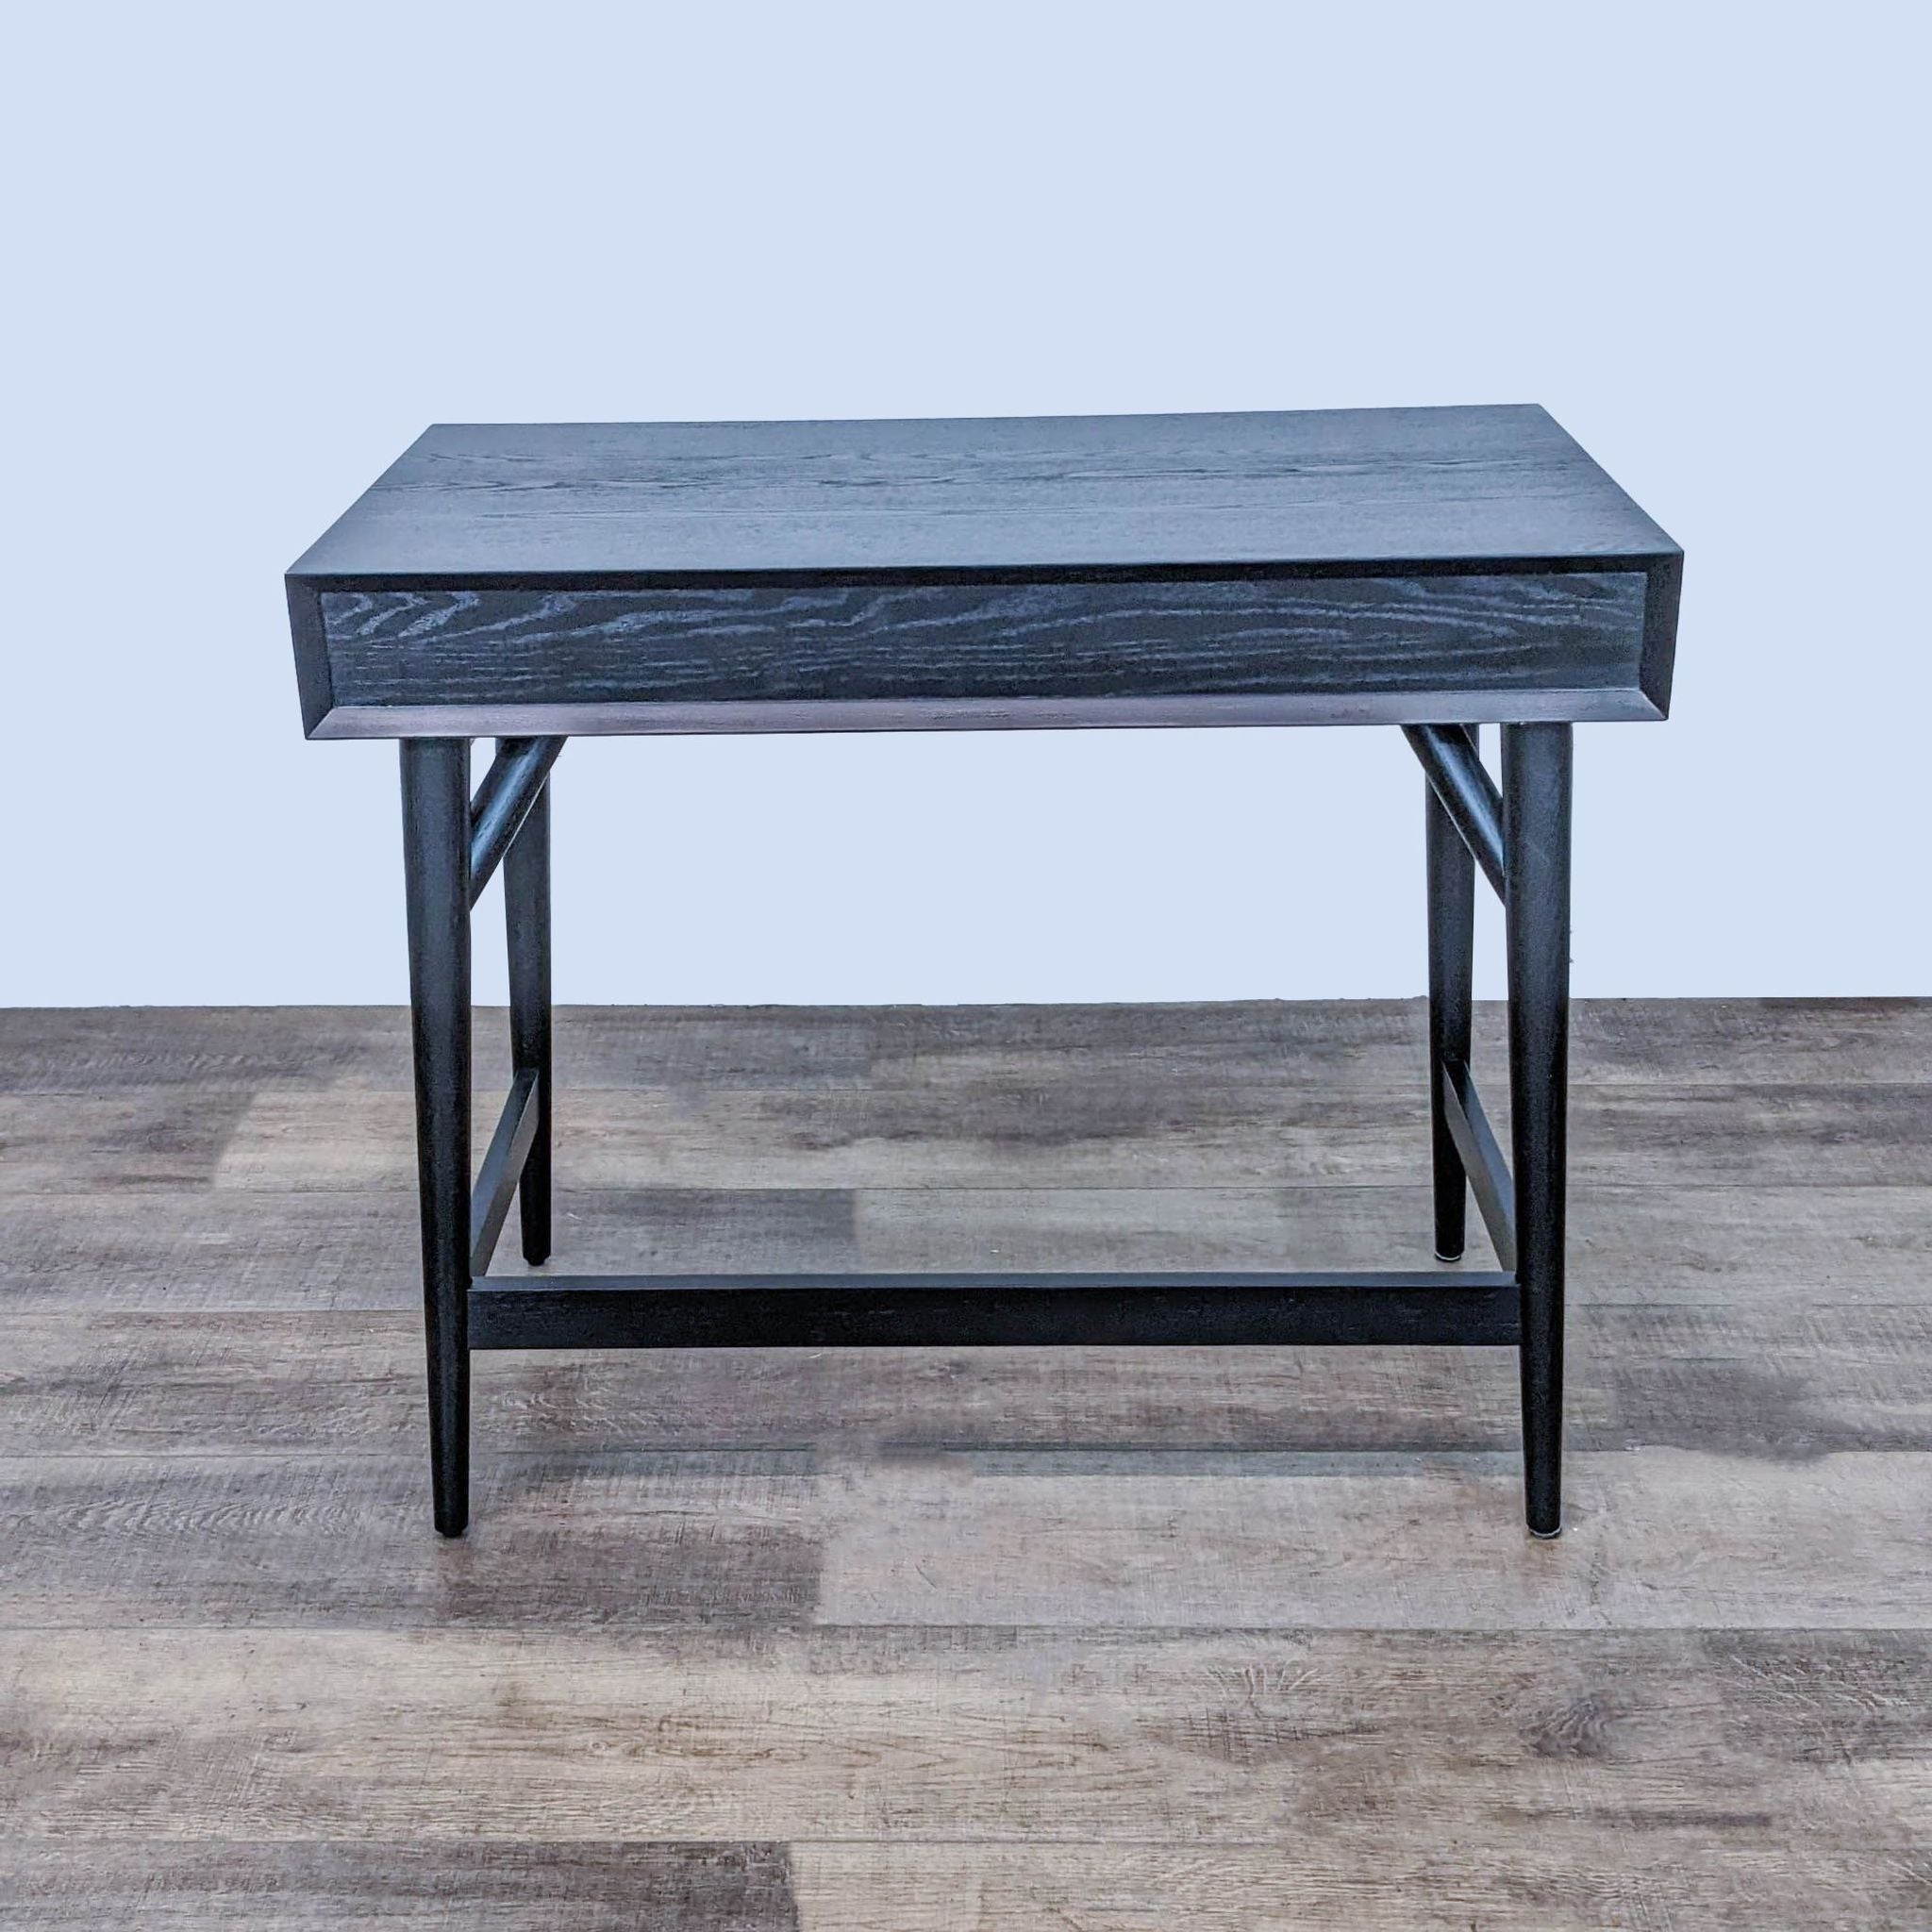 Stylish 36" West Elm desk in black, featuring a drawer and sleek metal pulls, displayed against a wooden floor backdrop.